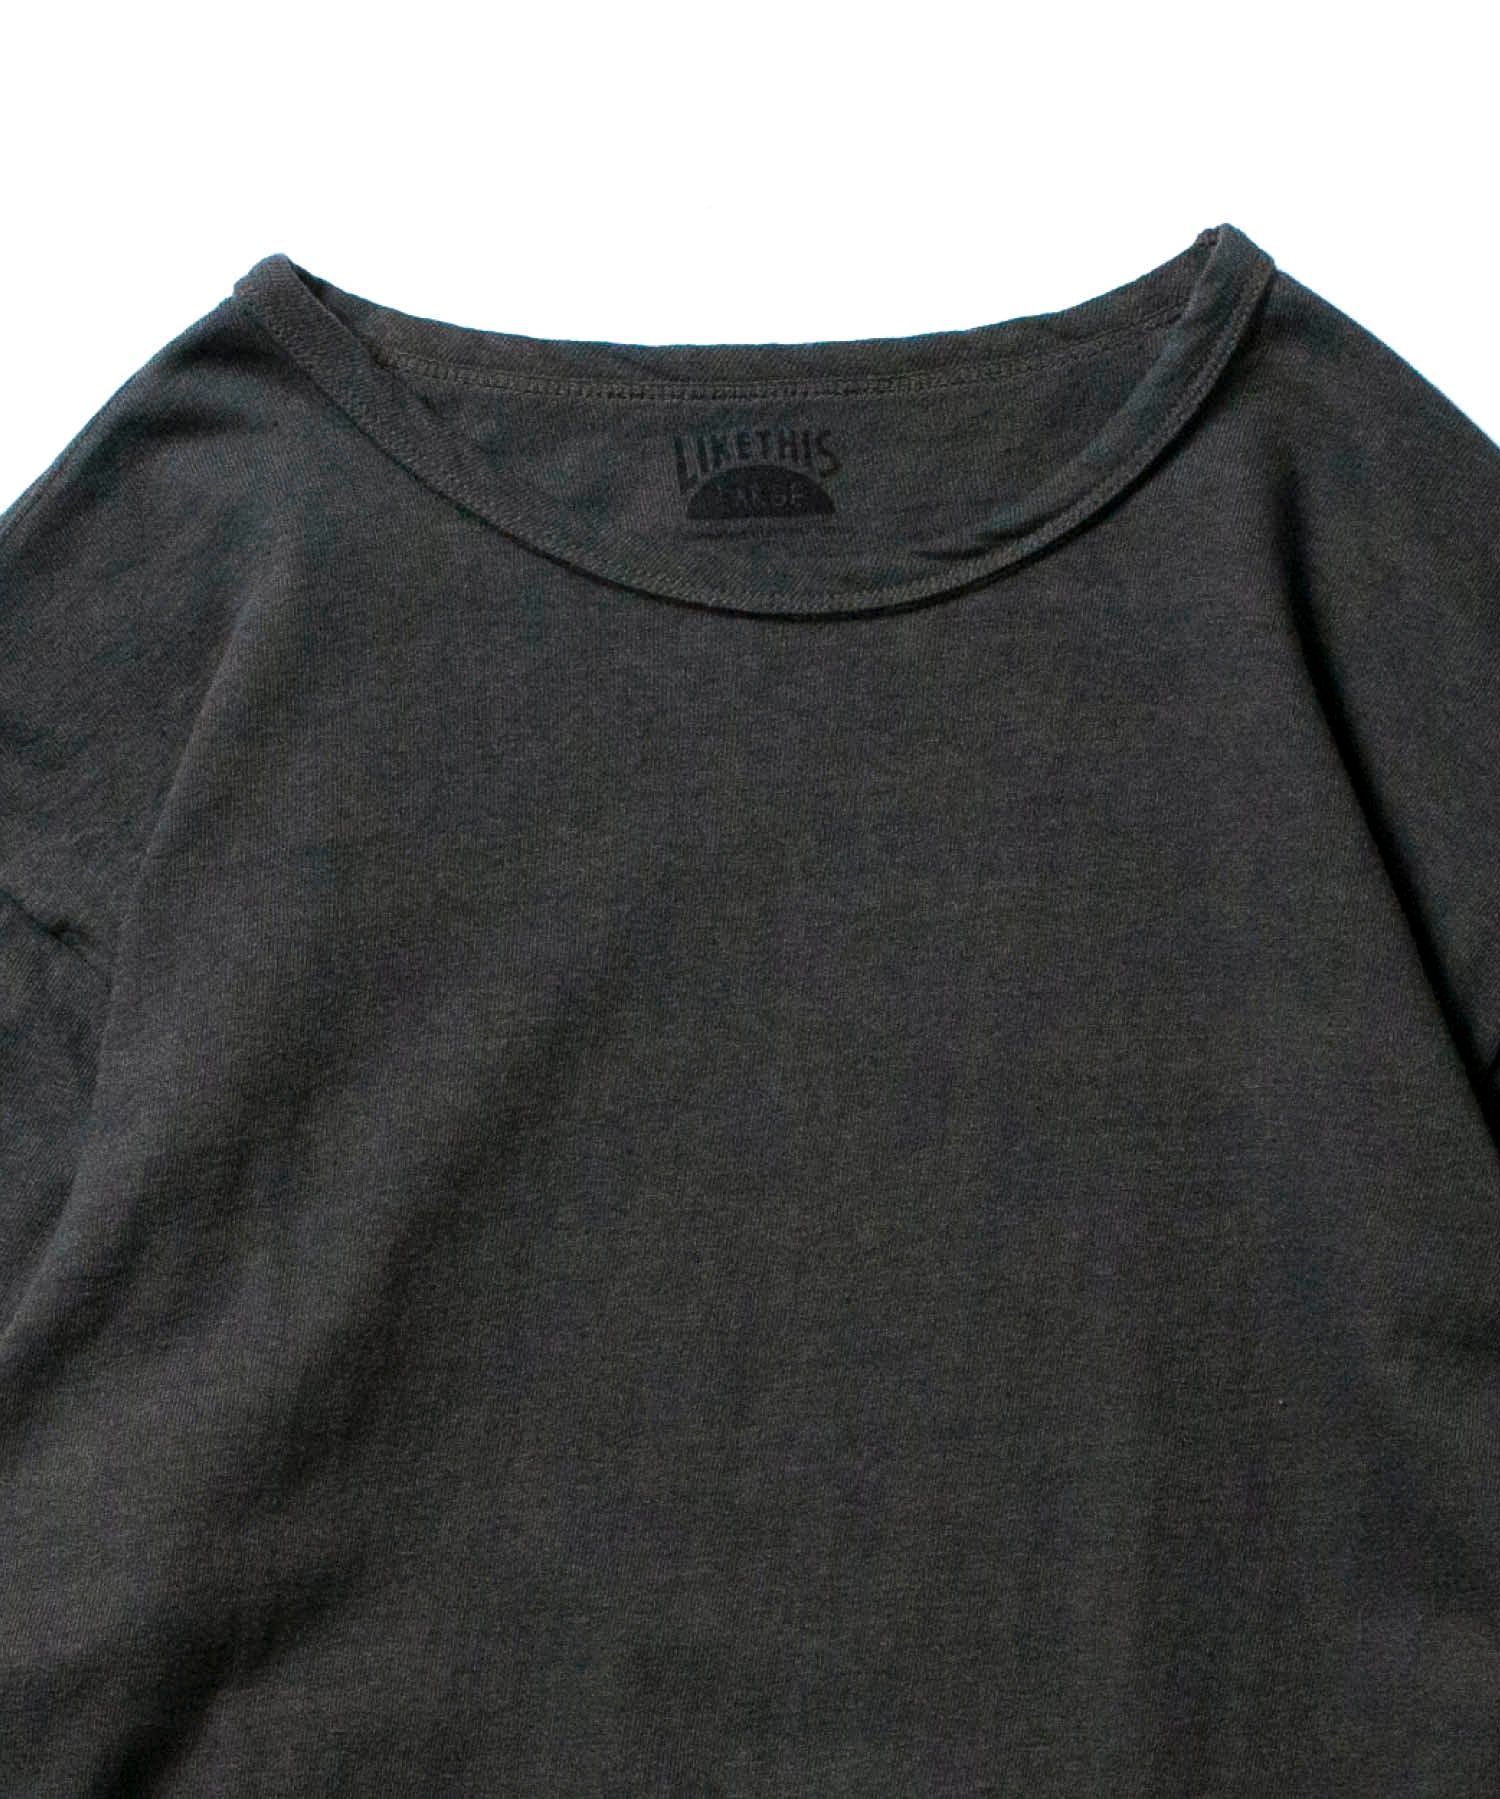 Recycle Organic Cotton Bamboo Charcoal Dye 4/5 Sleeve | LIKE THIS SHOP